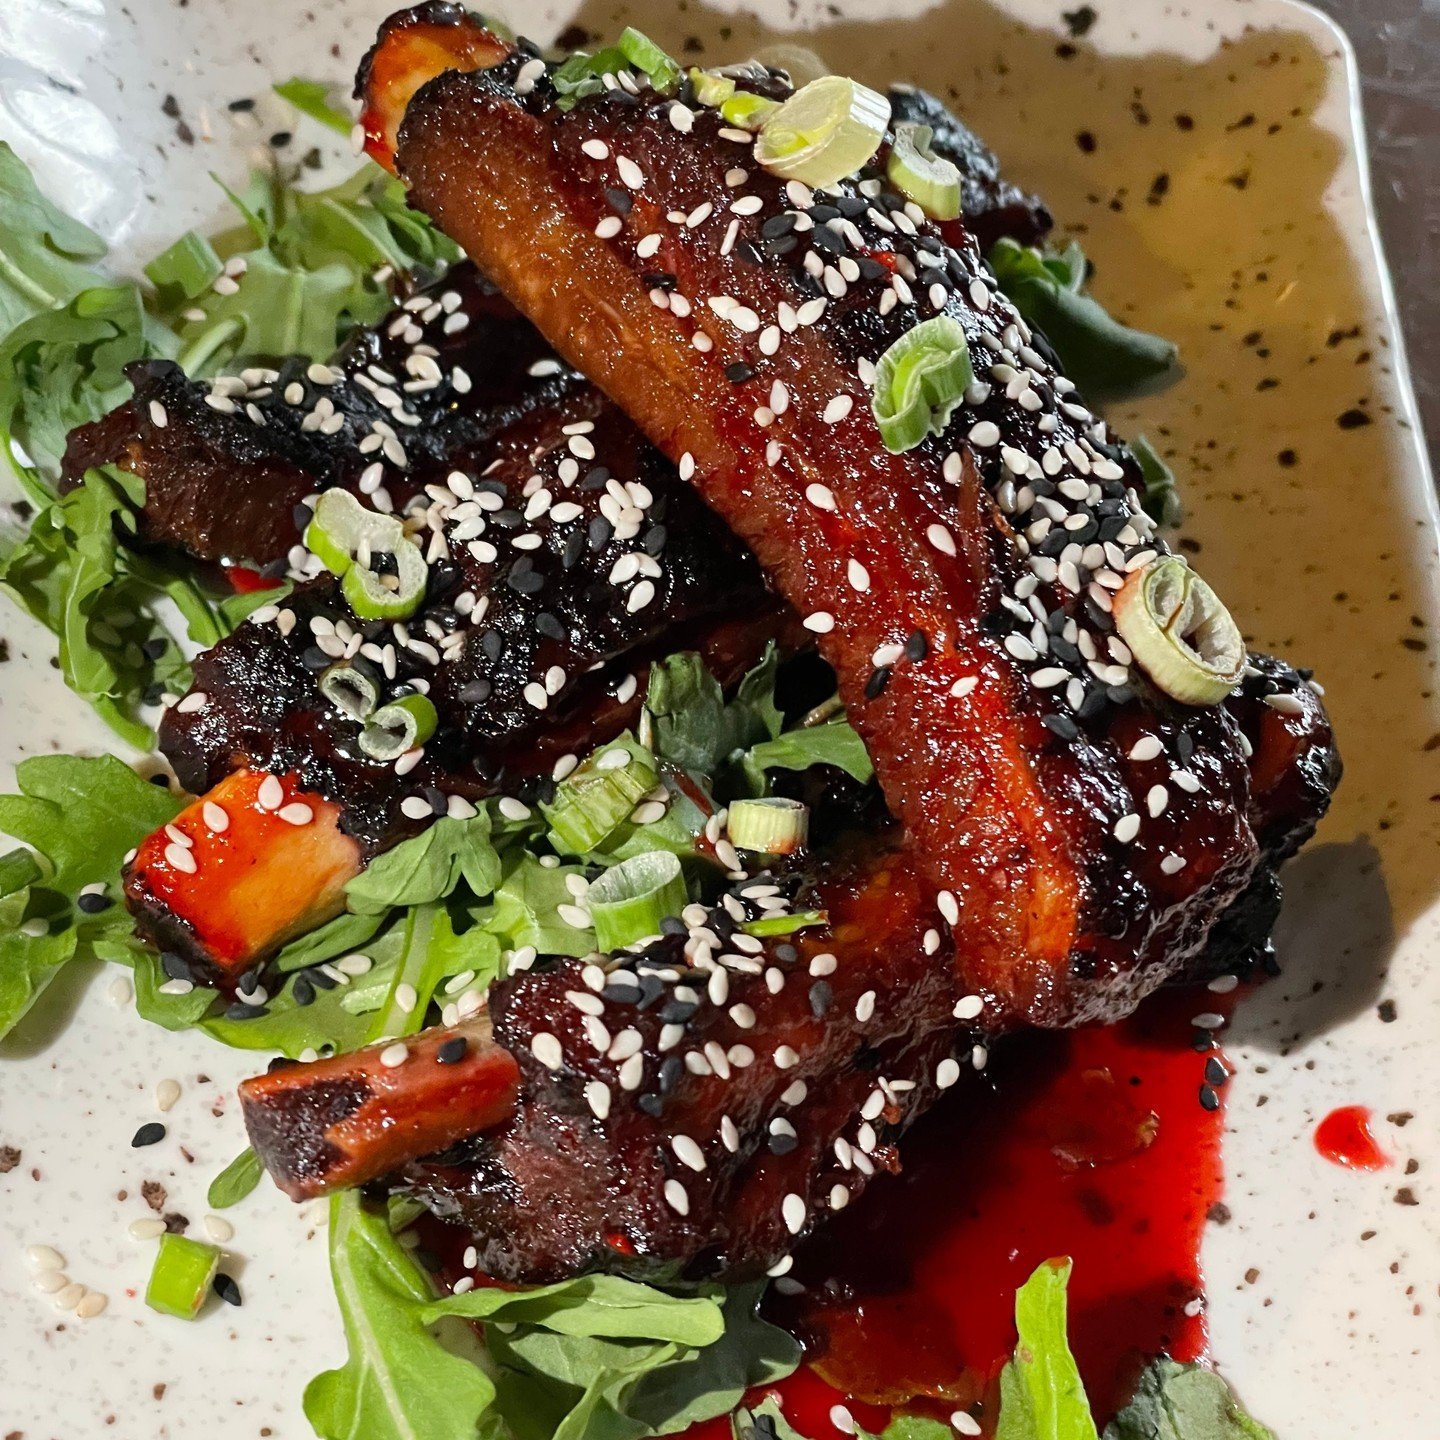 It's Fri-yay &amp; these Sticky Ribs are calling your name😍 Join us for a taste!😋 #foodie #stickyribs #Friday #weekend